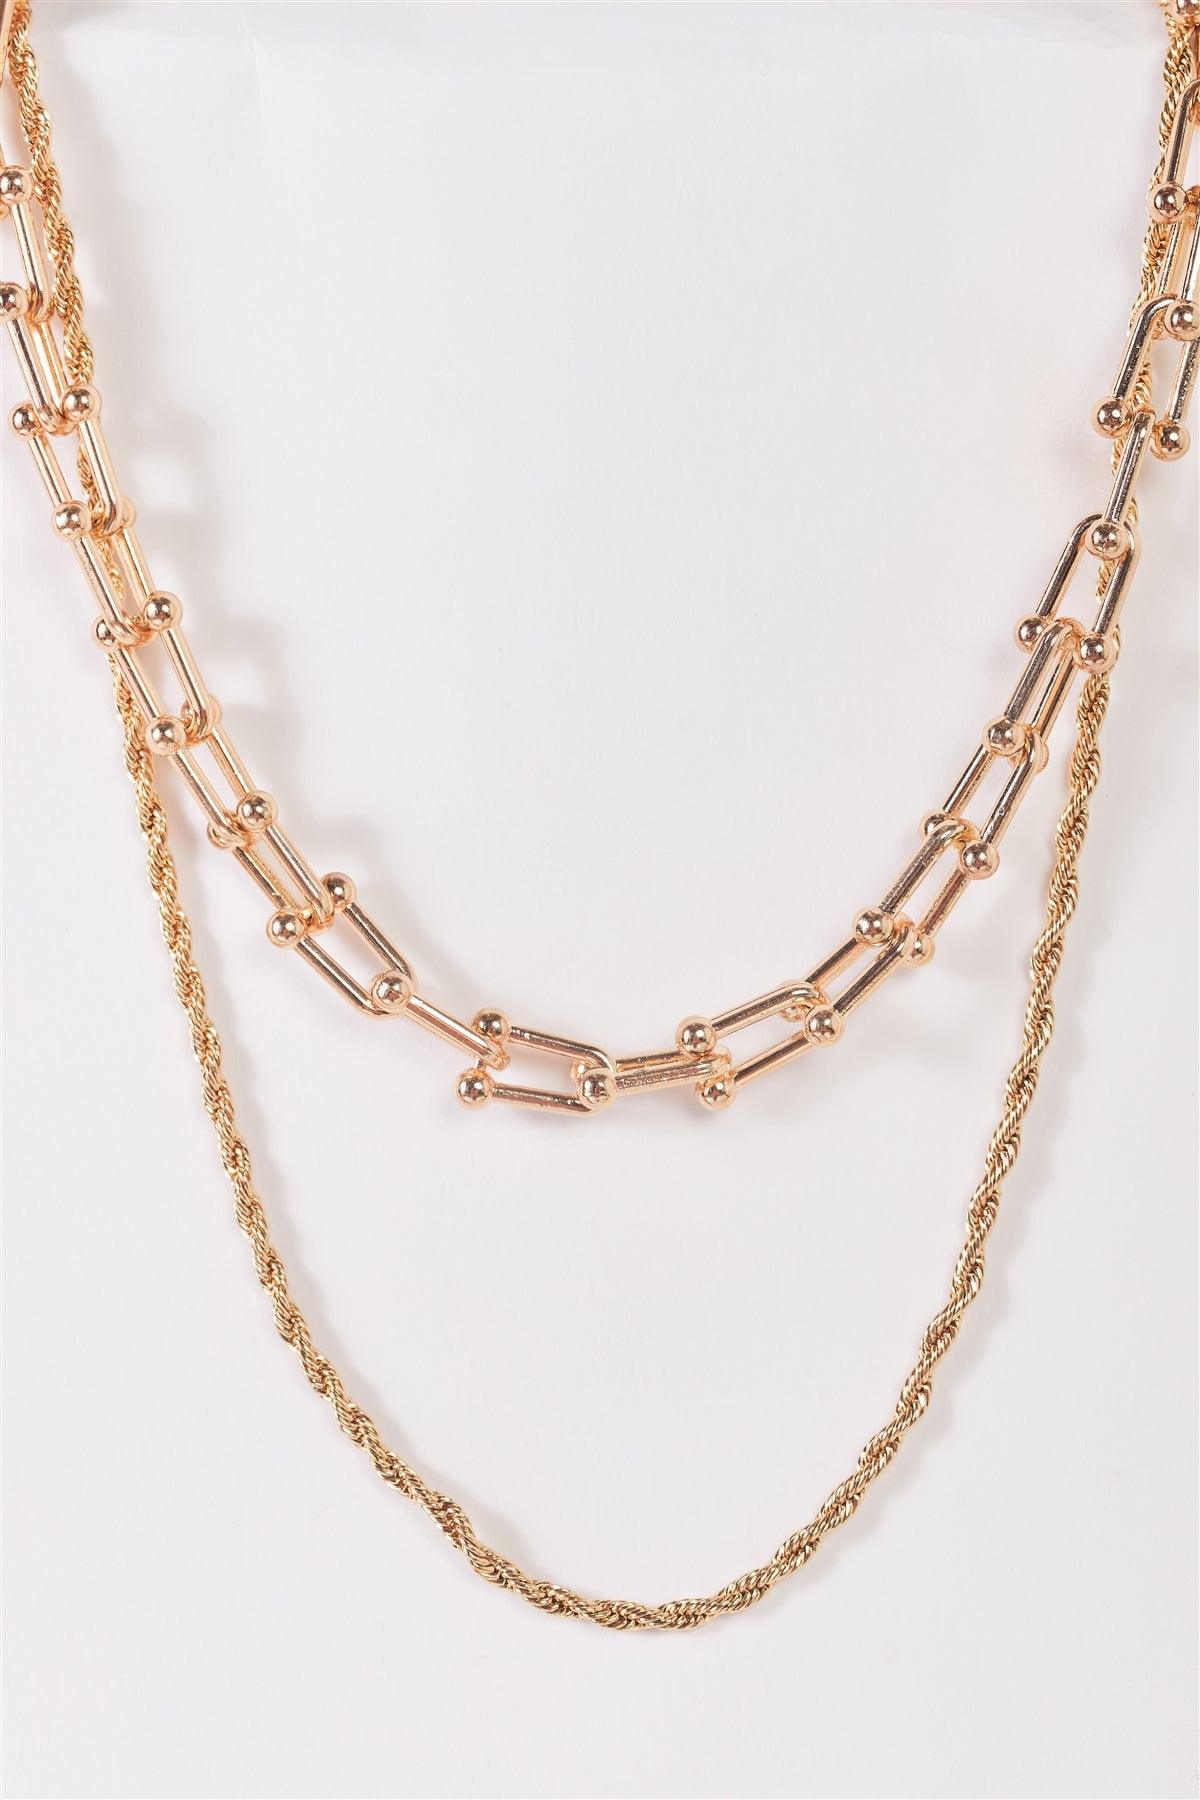 Gold Twisted And U Link Chains Set Necklace /3 Pieces